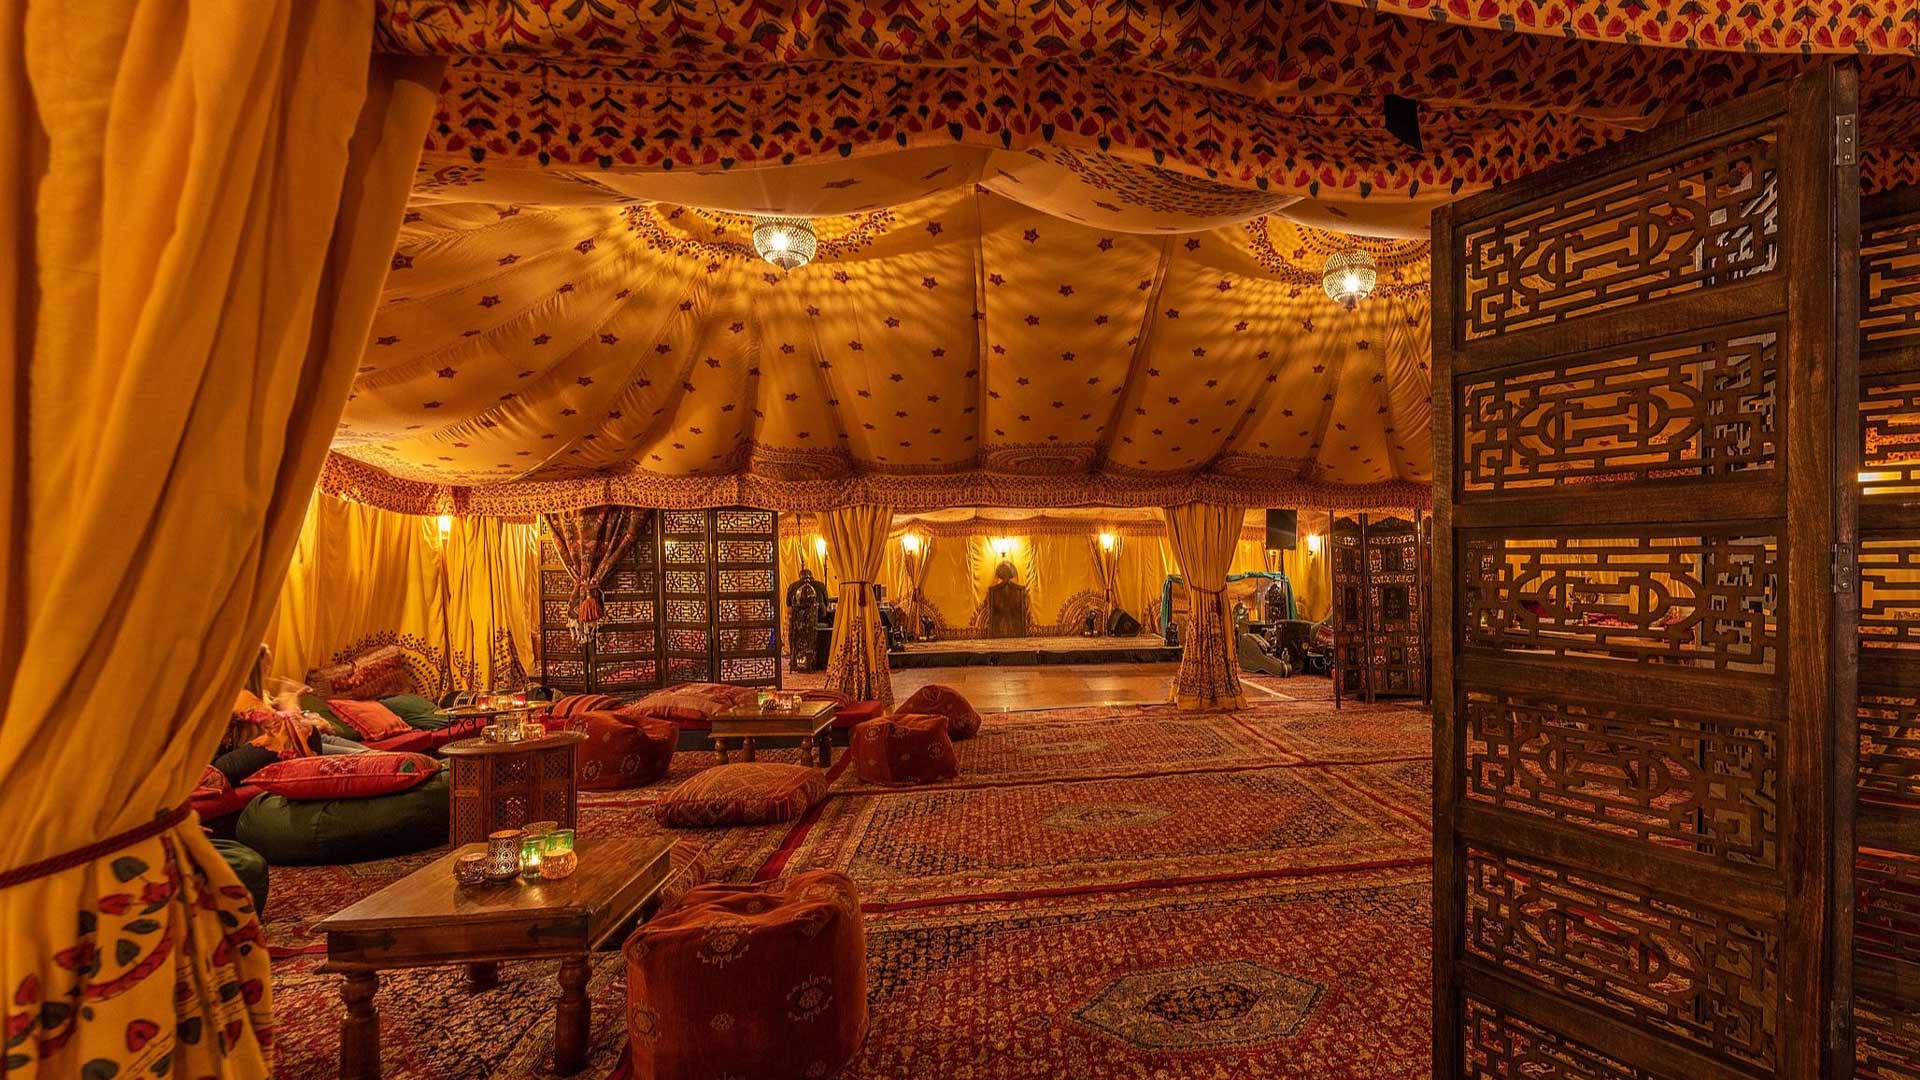 An Arabian tent with hand block printed Saffron linings